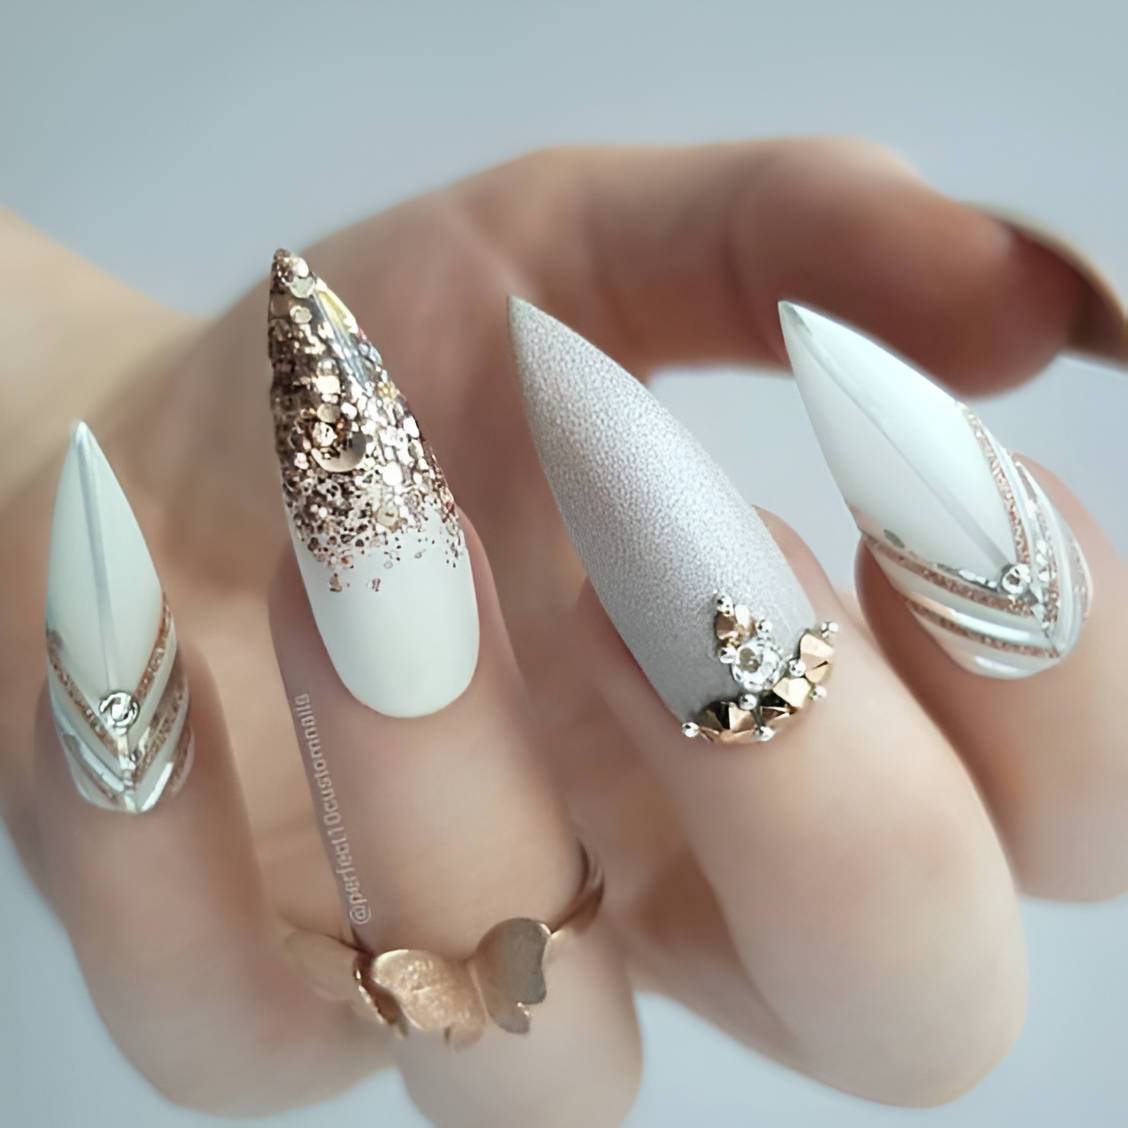 Stunning Stiletto Nail Designs Nobody Can Resist - 221